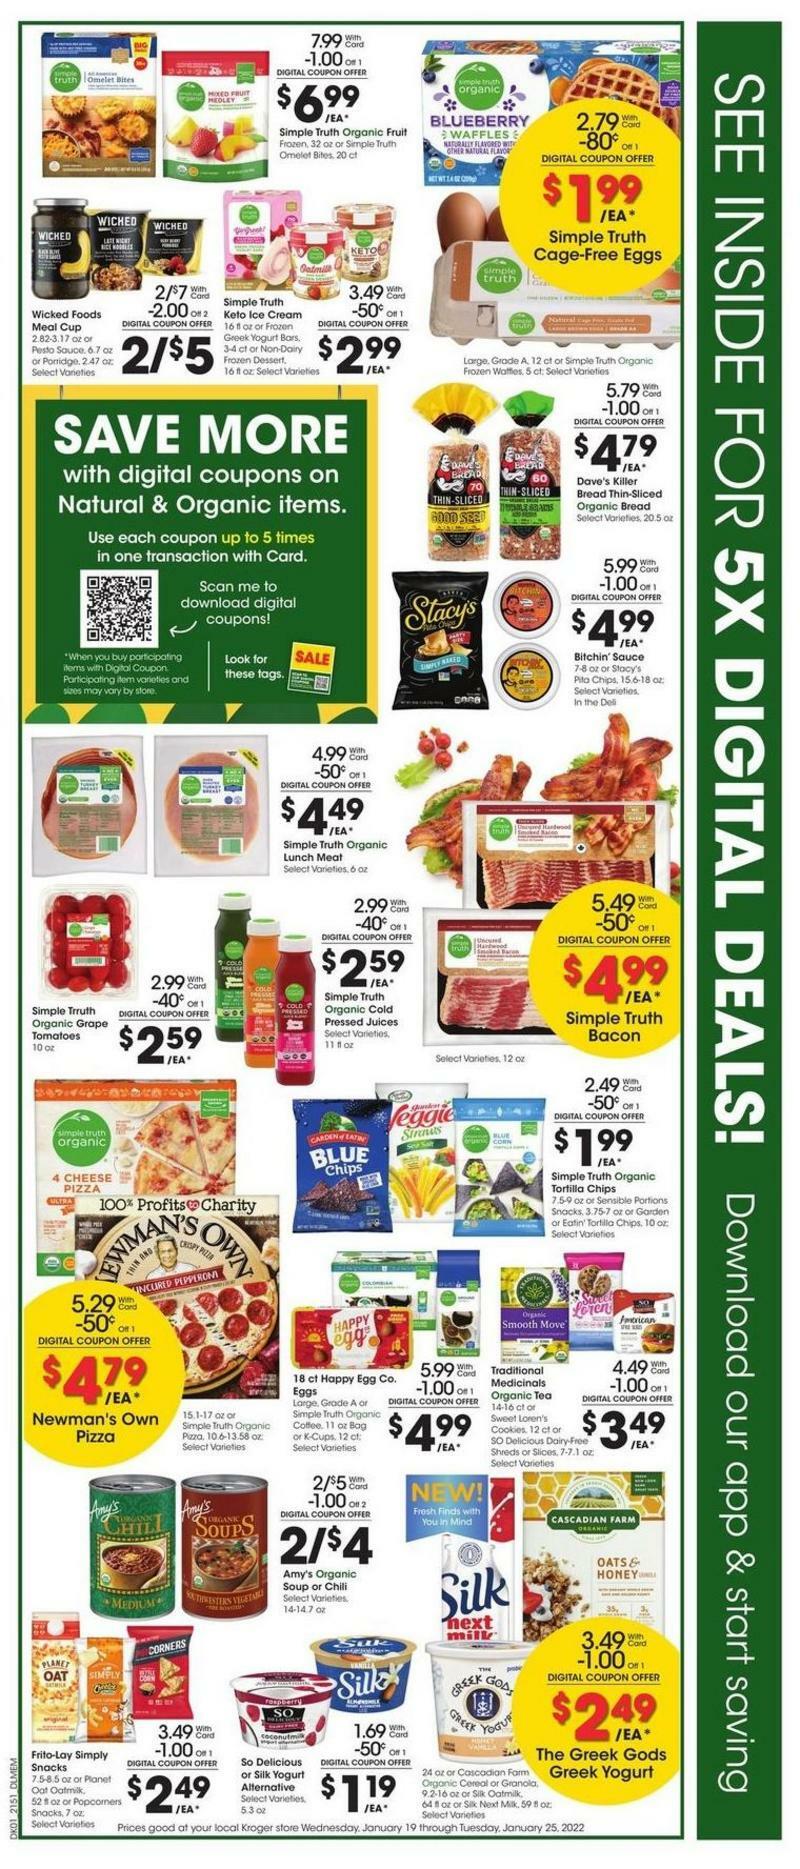 Kroger Weekly Ad from January 19